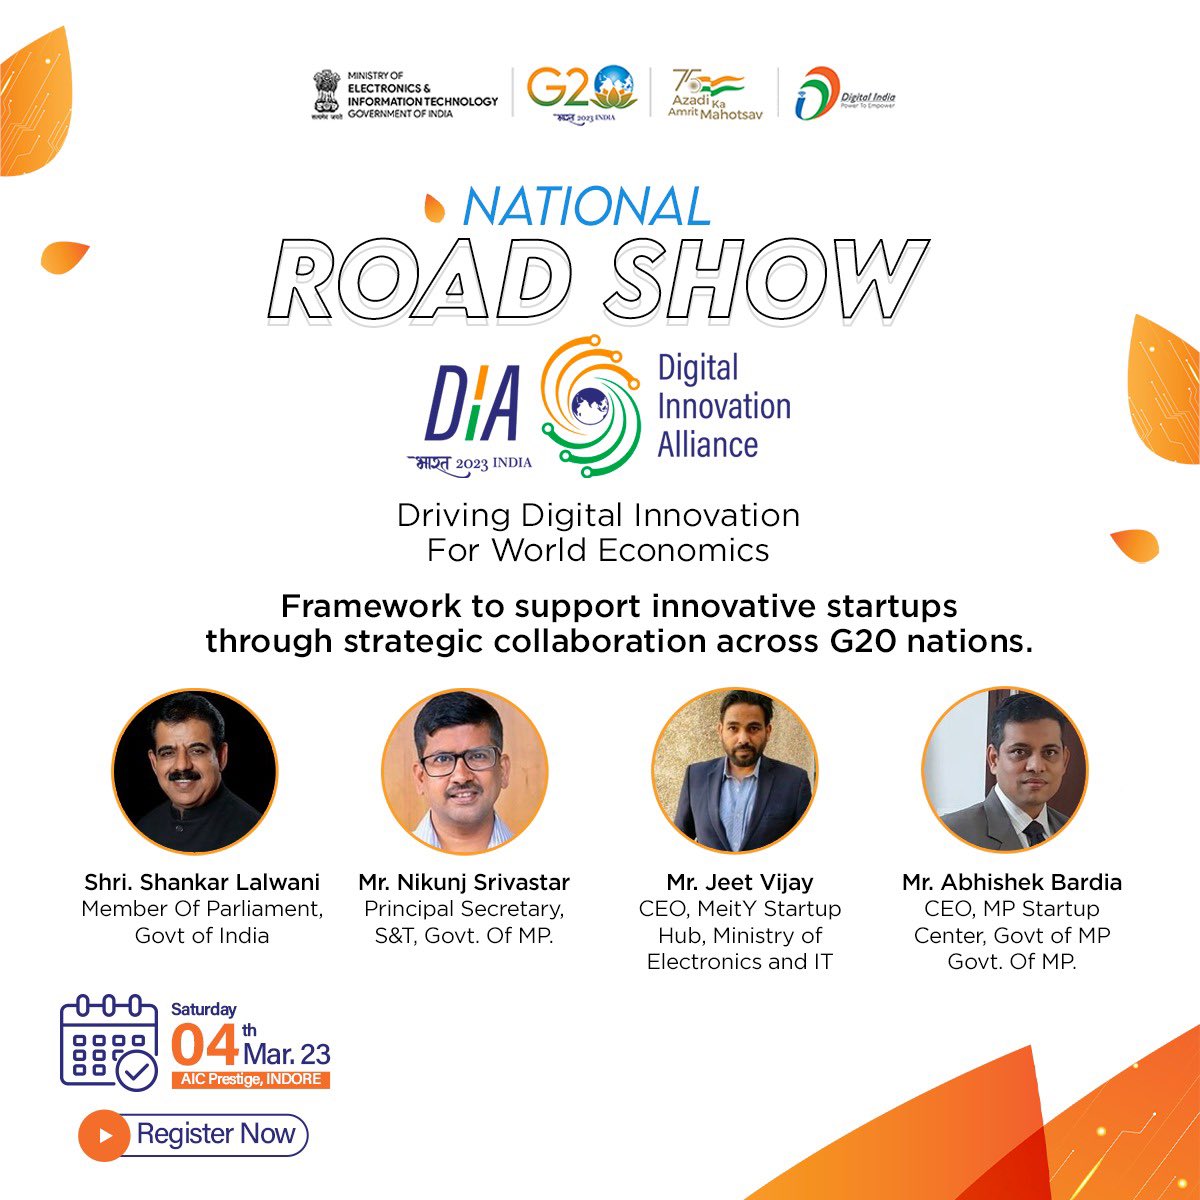 Join us for an enriching session on Catalyzing Digital transformation in smaller cities and new cities as we hear from some of the seasoned tech experts! Don’t miss out 📅: 4th Mar, 2023 ⏰: 1PM 📍: AIC Prestige Institute, Indore. #G20DIA #G20India #G20DEWG @G20Dia